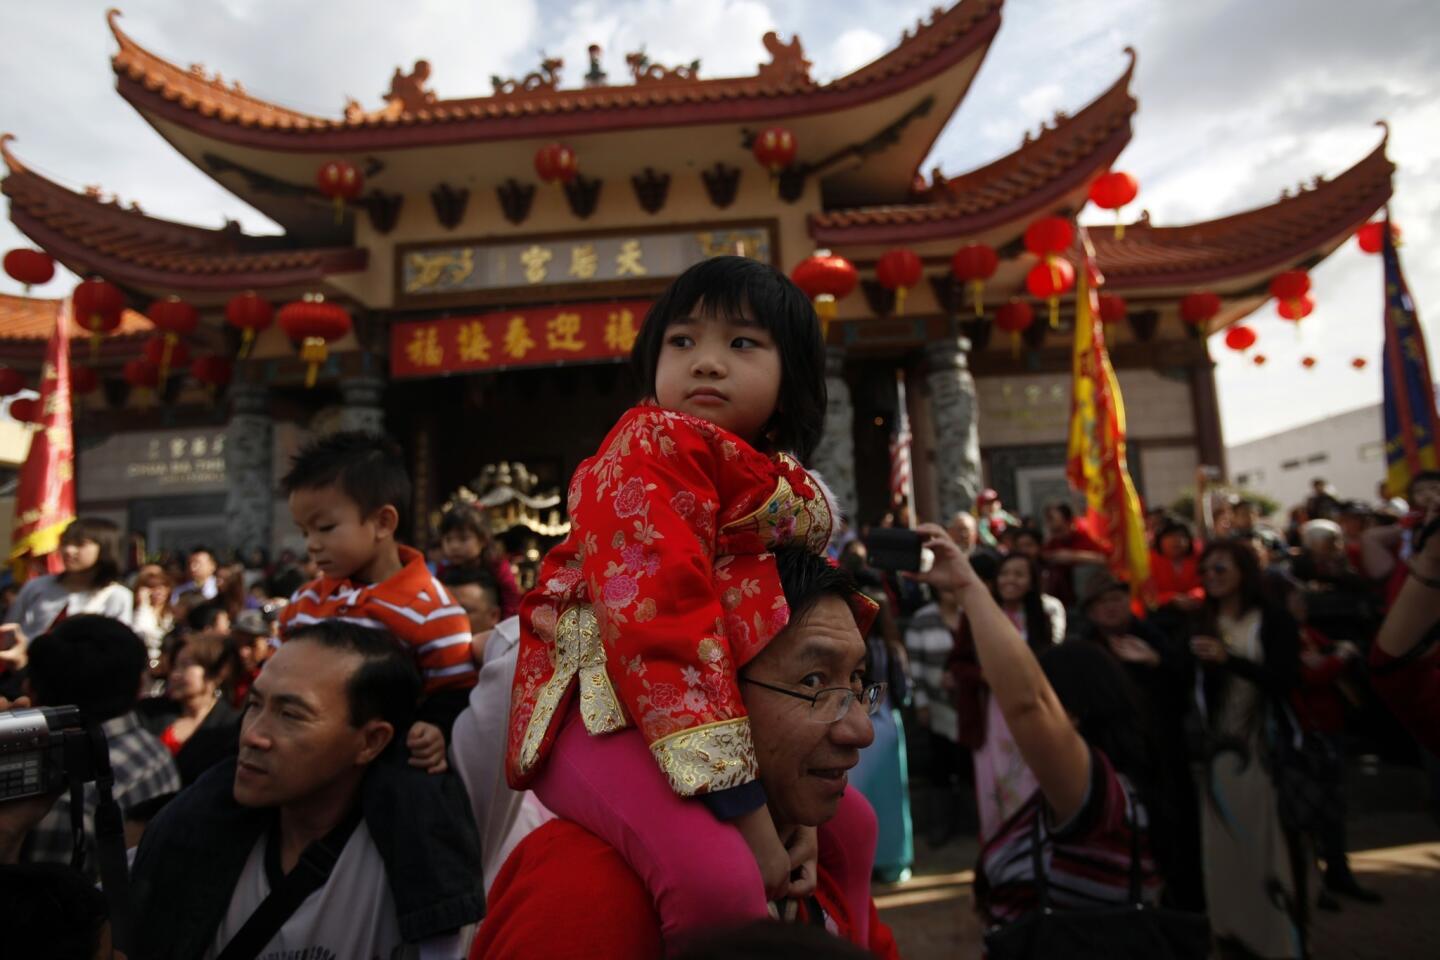 Thousands gather at the Thien Hau Temple in Los Angeles' Chinatown to celebrate Chinese New Year.